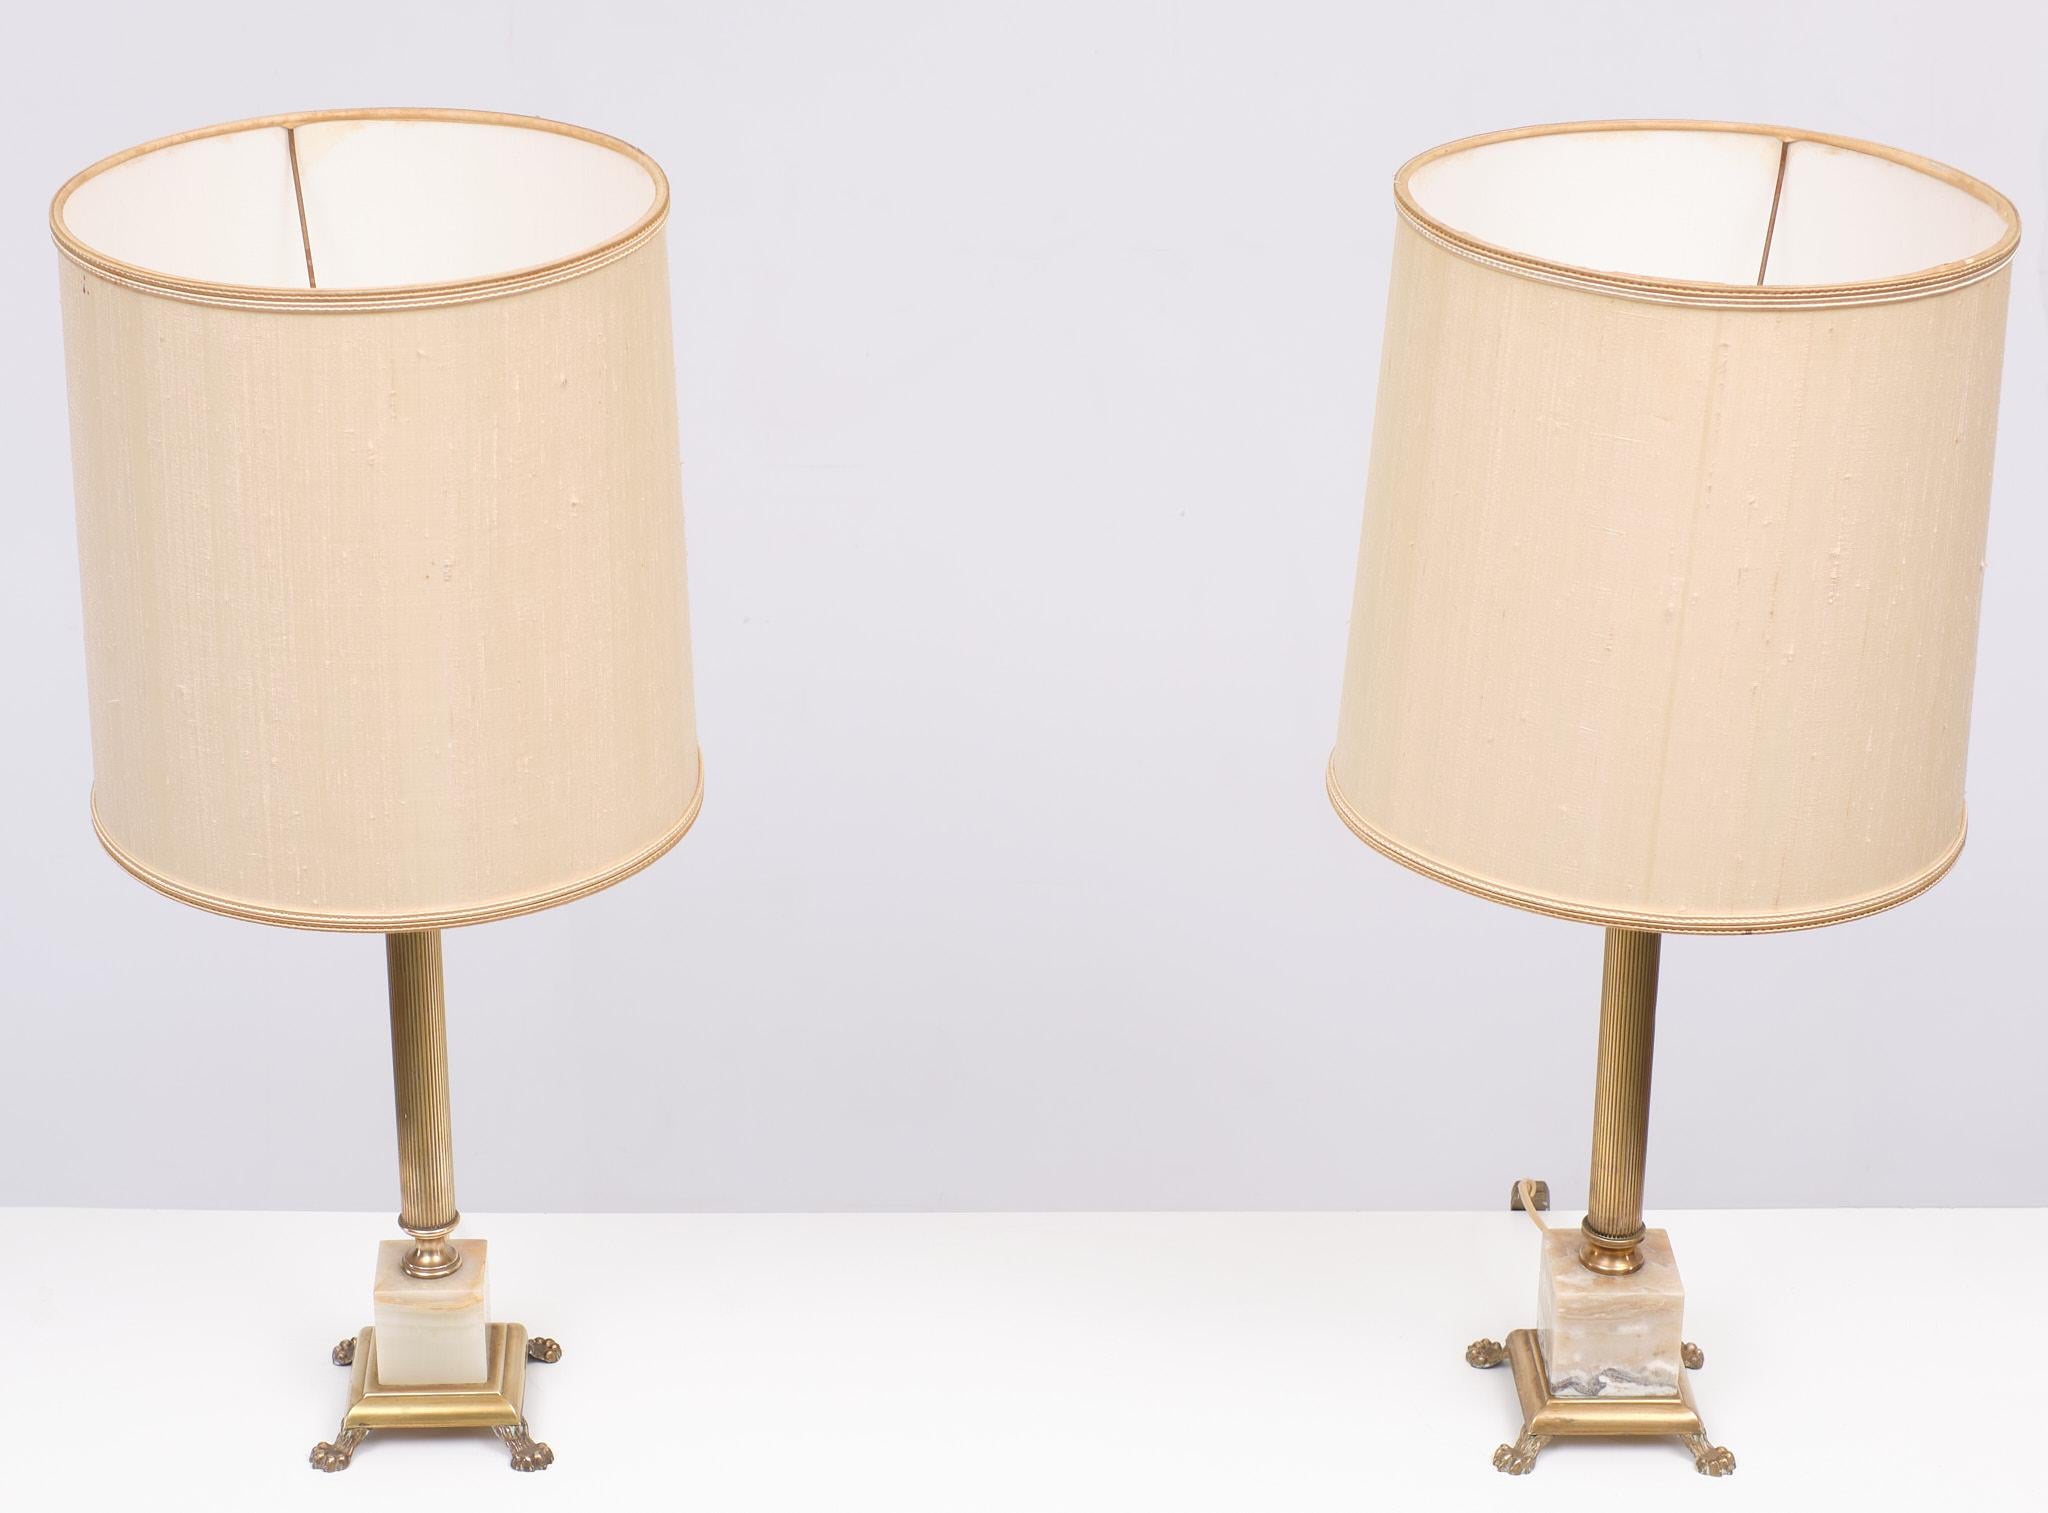 Two Classic Colum Table Lamps, 1960s, France For Sale 3